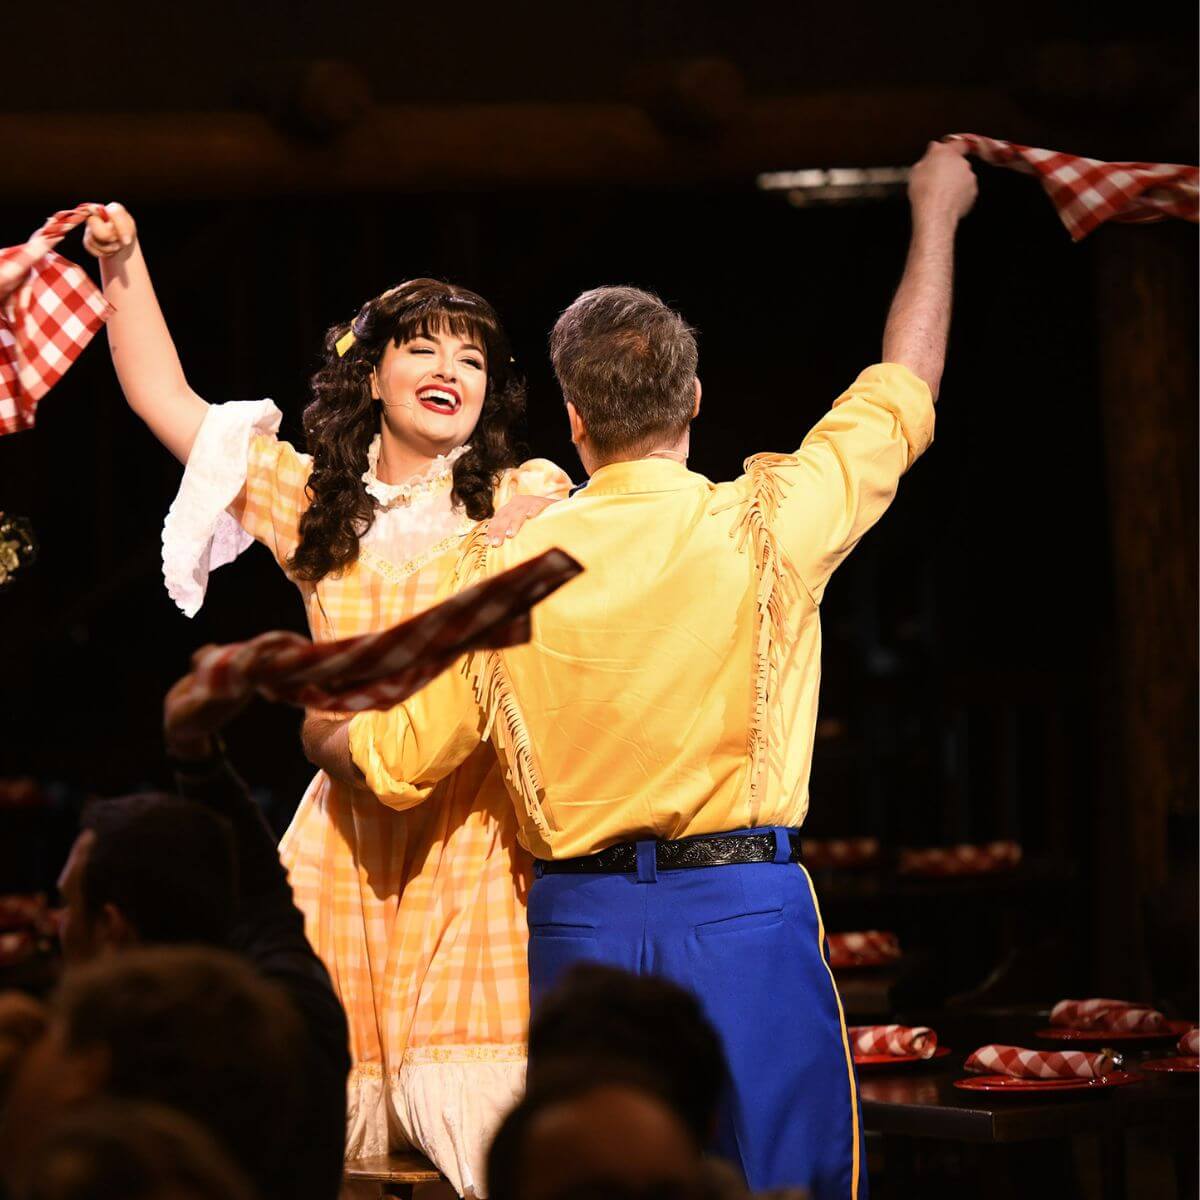 Photo of performers dancing in the Hoop-Dee-Doo Musical Review Dinner Show at Disney World.